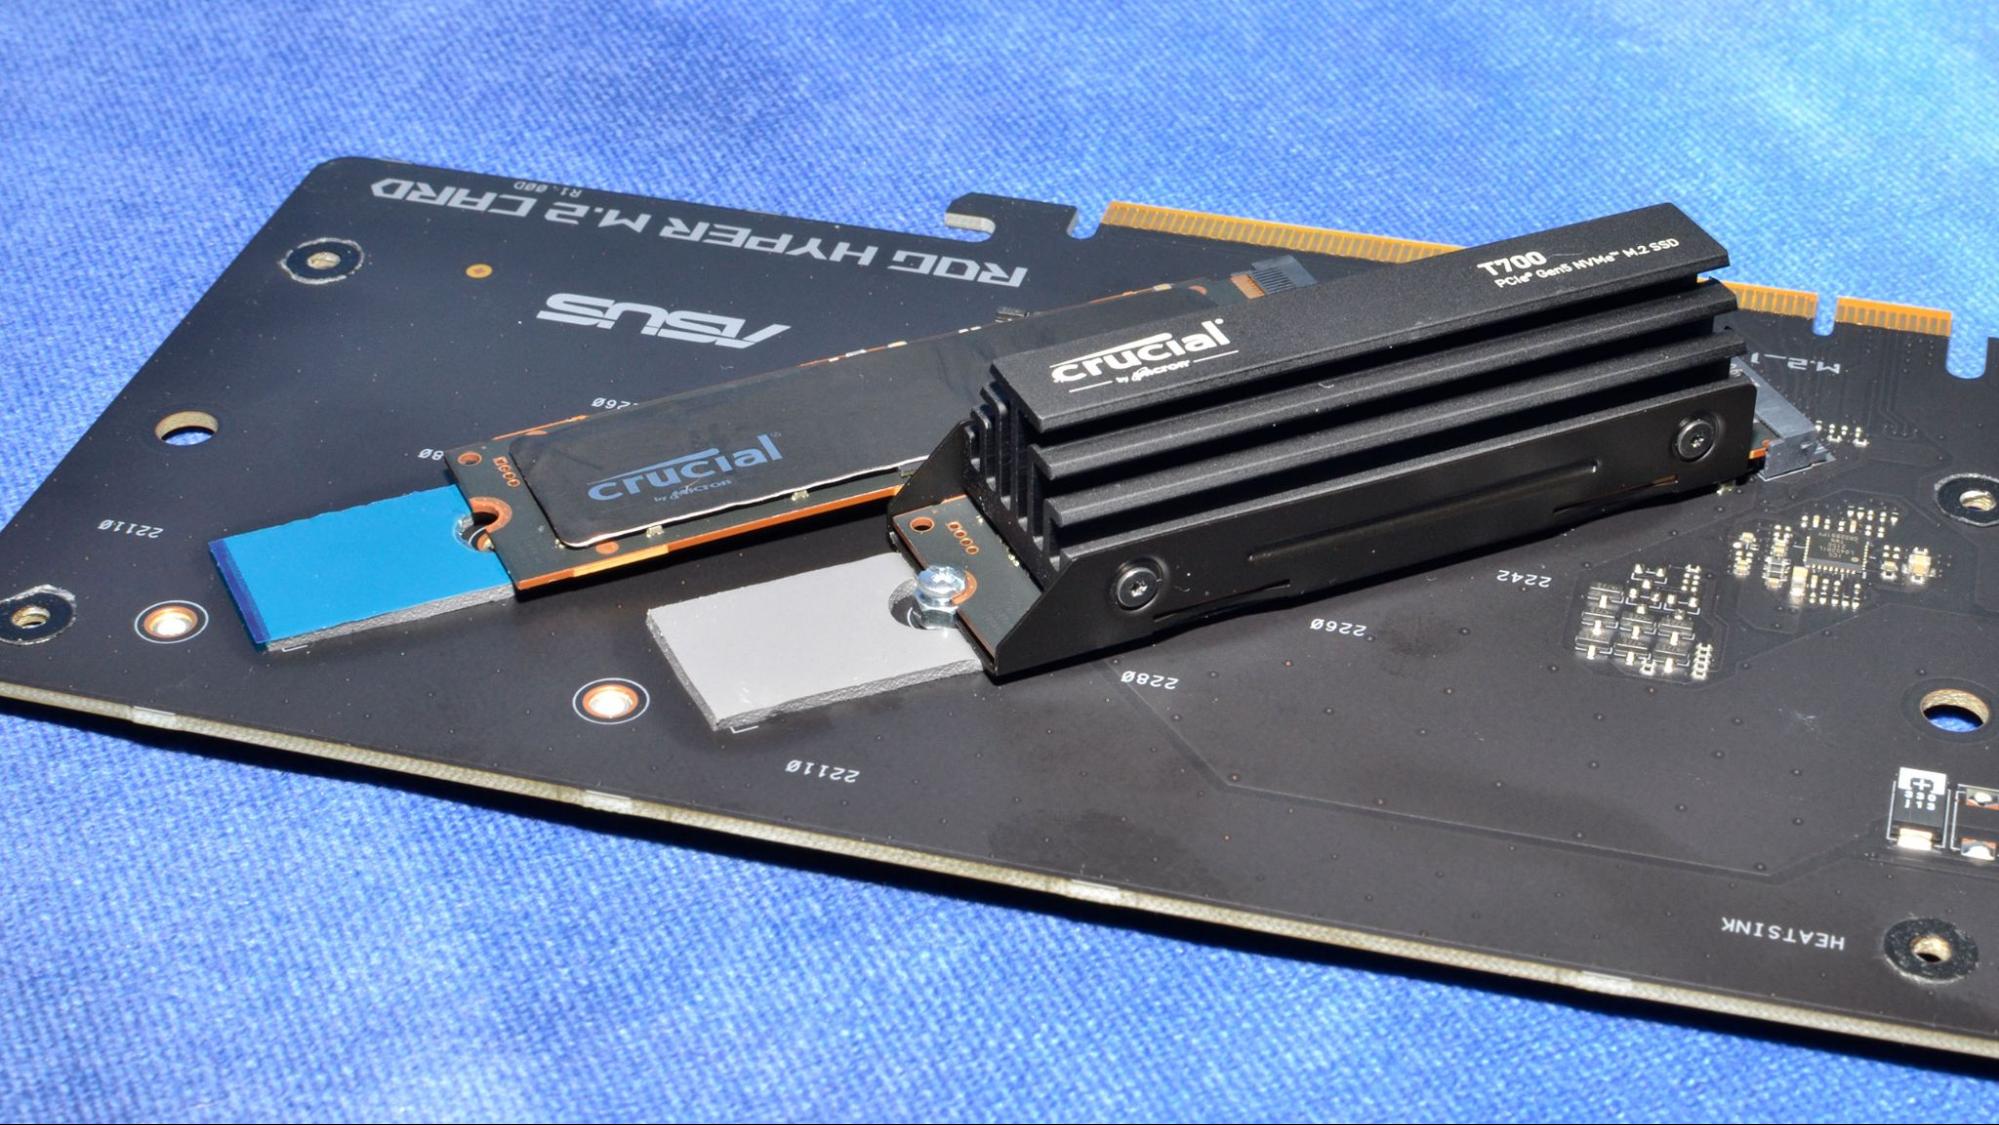 Crucial T700 Gen5 SSD from Micron is its fastest ever with 12.4 GB/s read  speeds